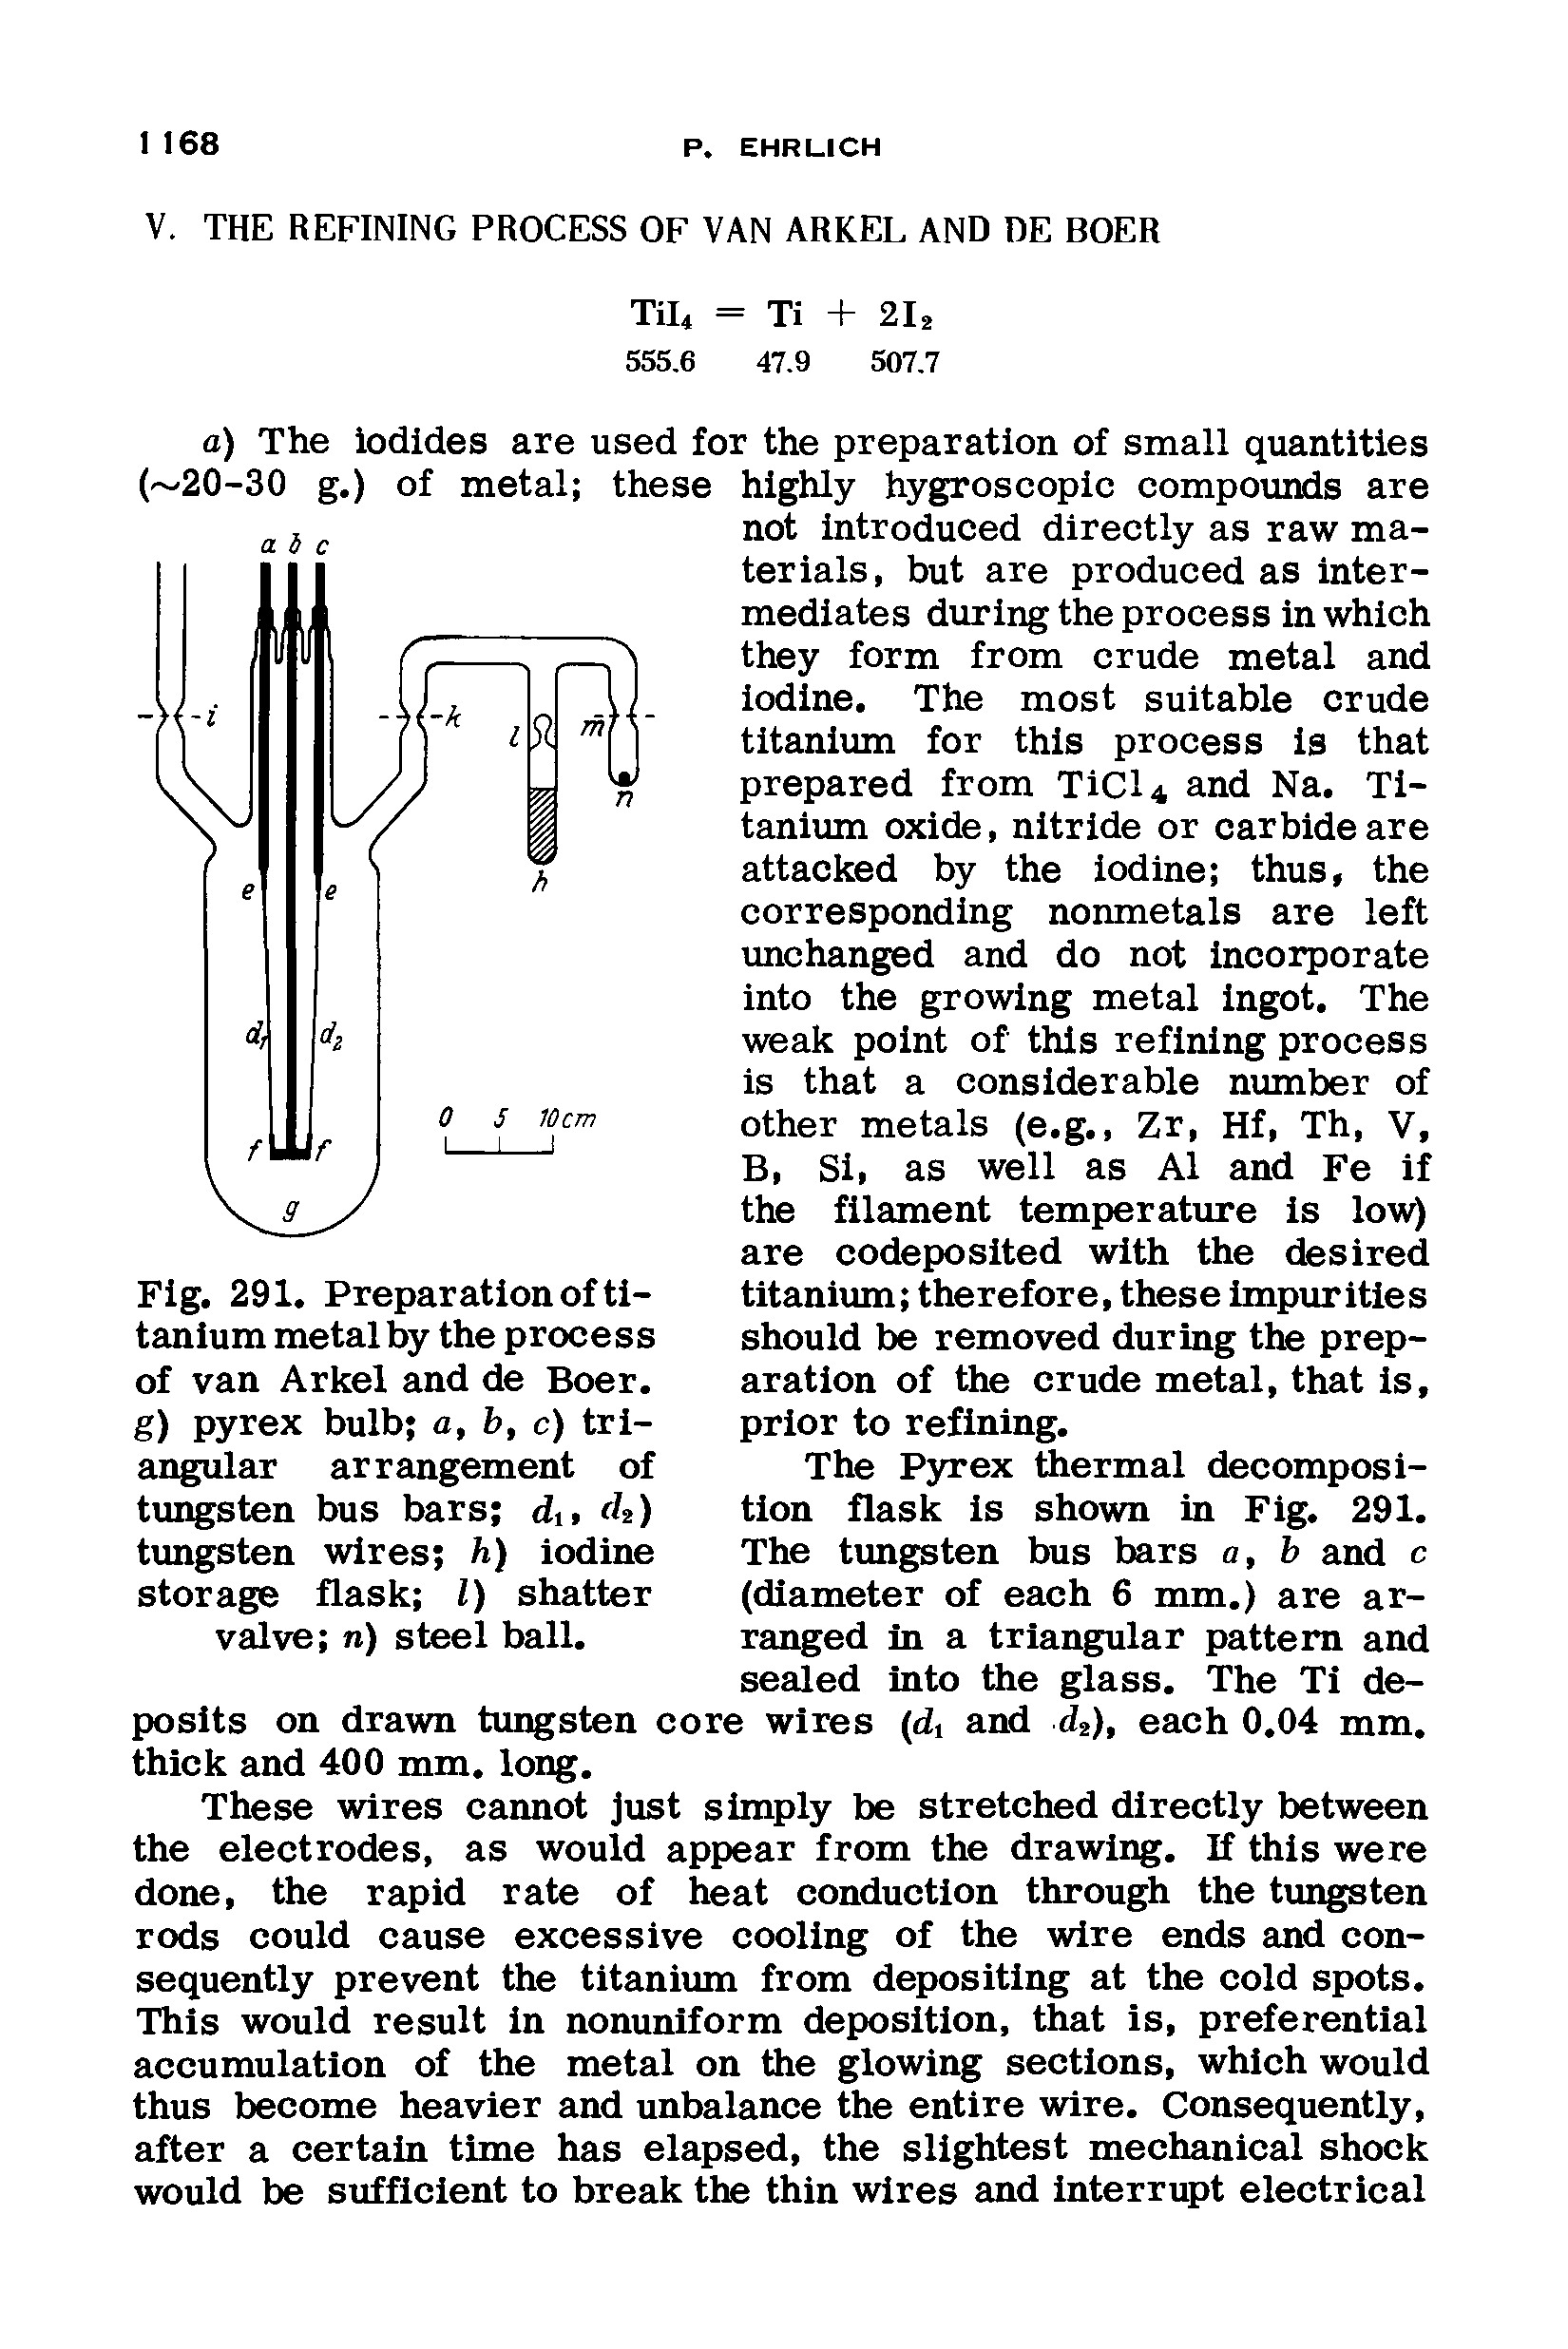 Fig. 291. Preparation of titanium metal by the process of van Arkel and de Boer. g) pyrex bulb a, b, c) tri-ai lar arrangement of tungsten bus bars d, (h) tungsten wires h) iodine storage flask 0 shatter valve n) steel ball.